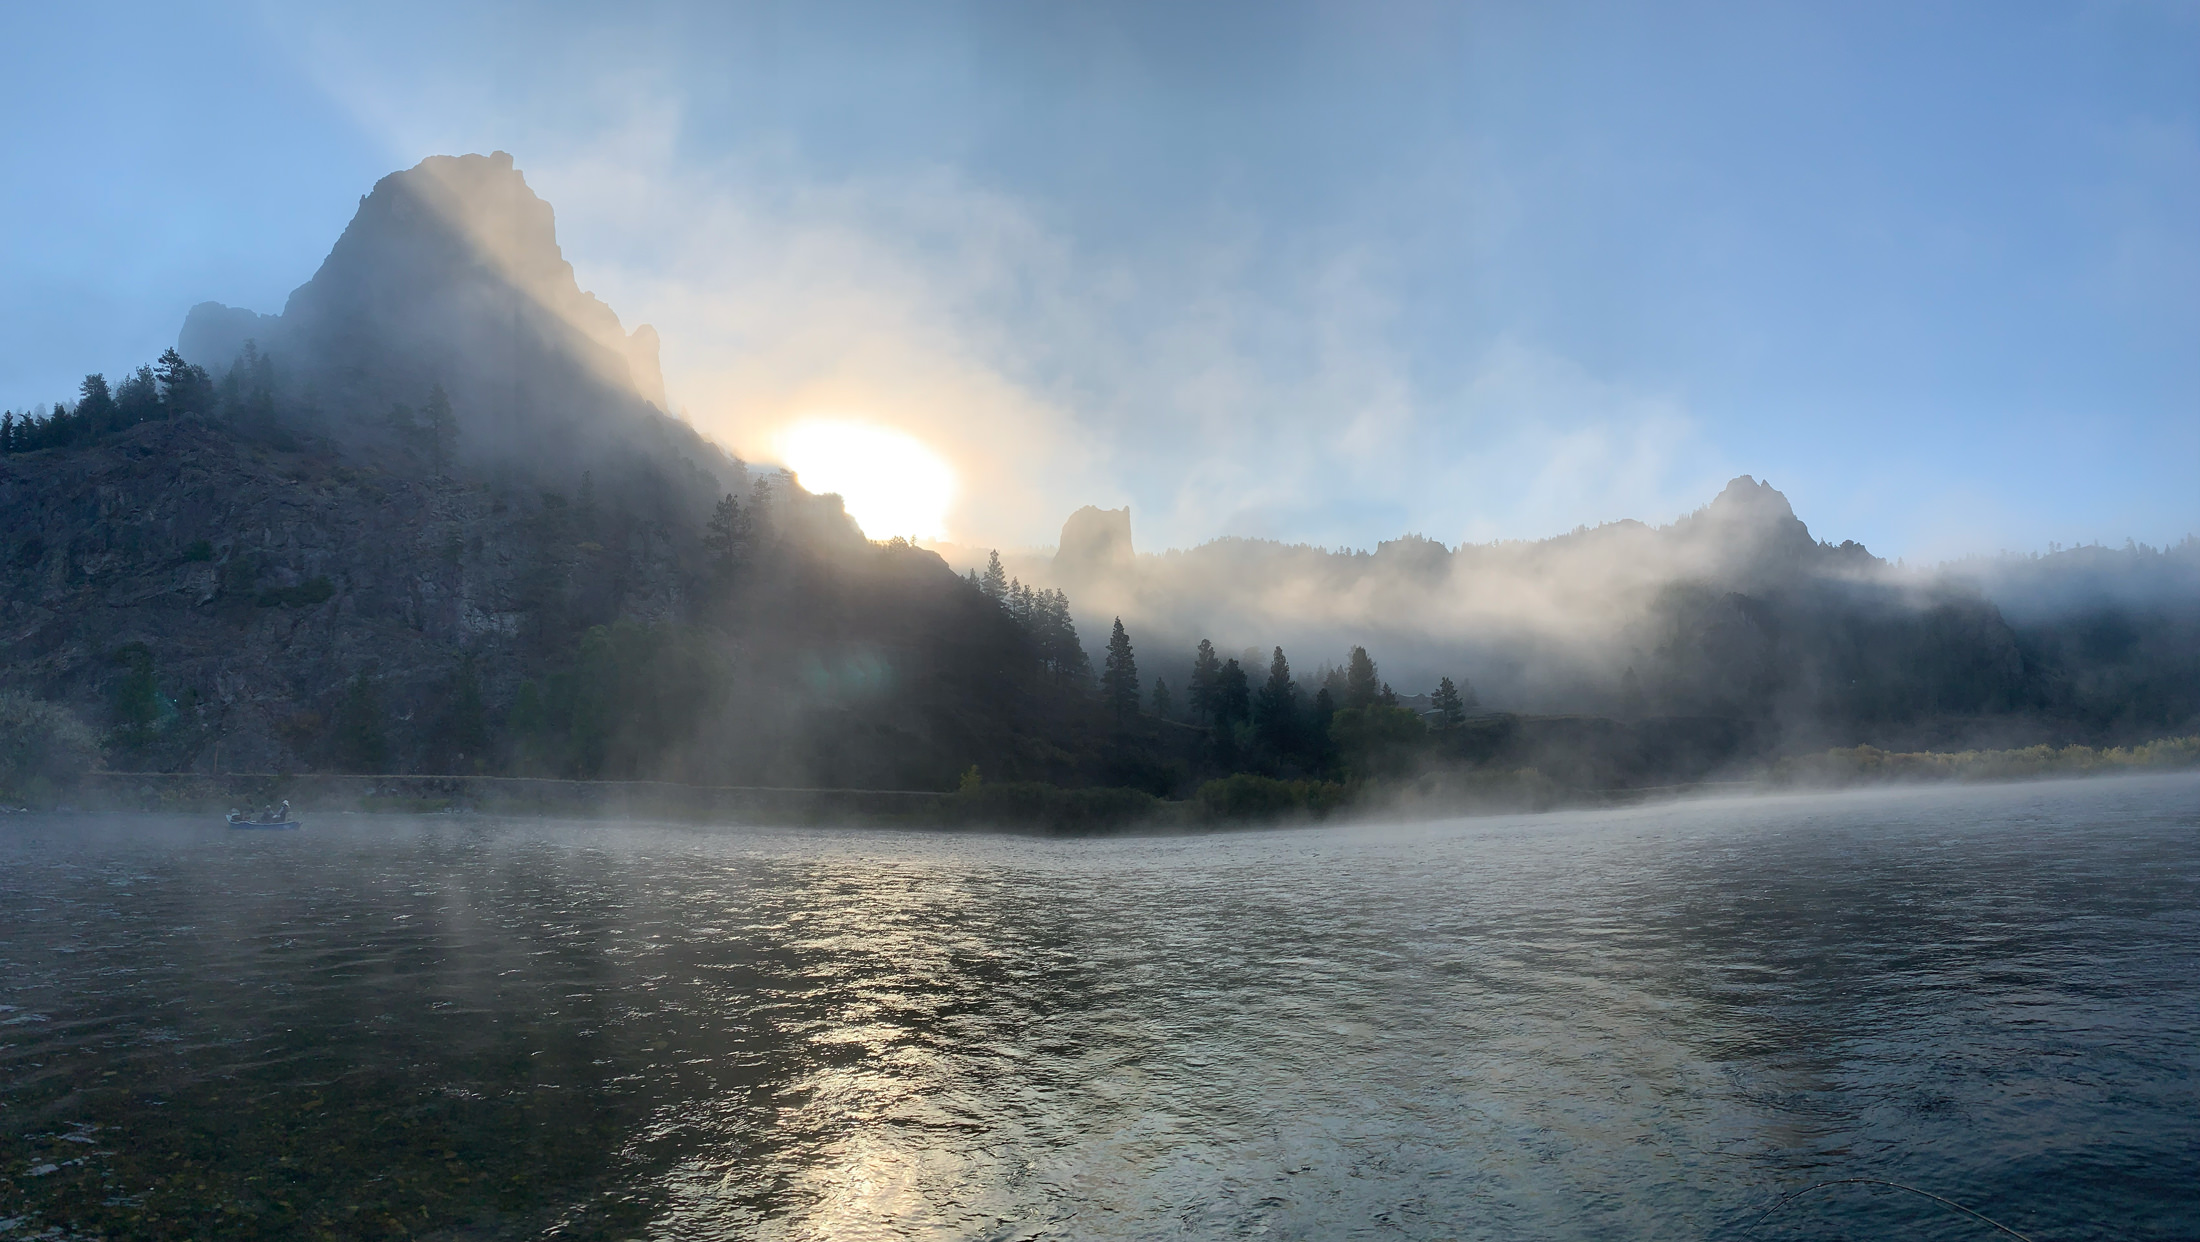 river in foreground with mountains and fog in background with rising sun